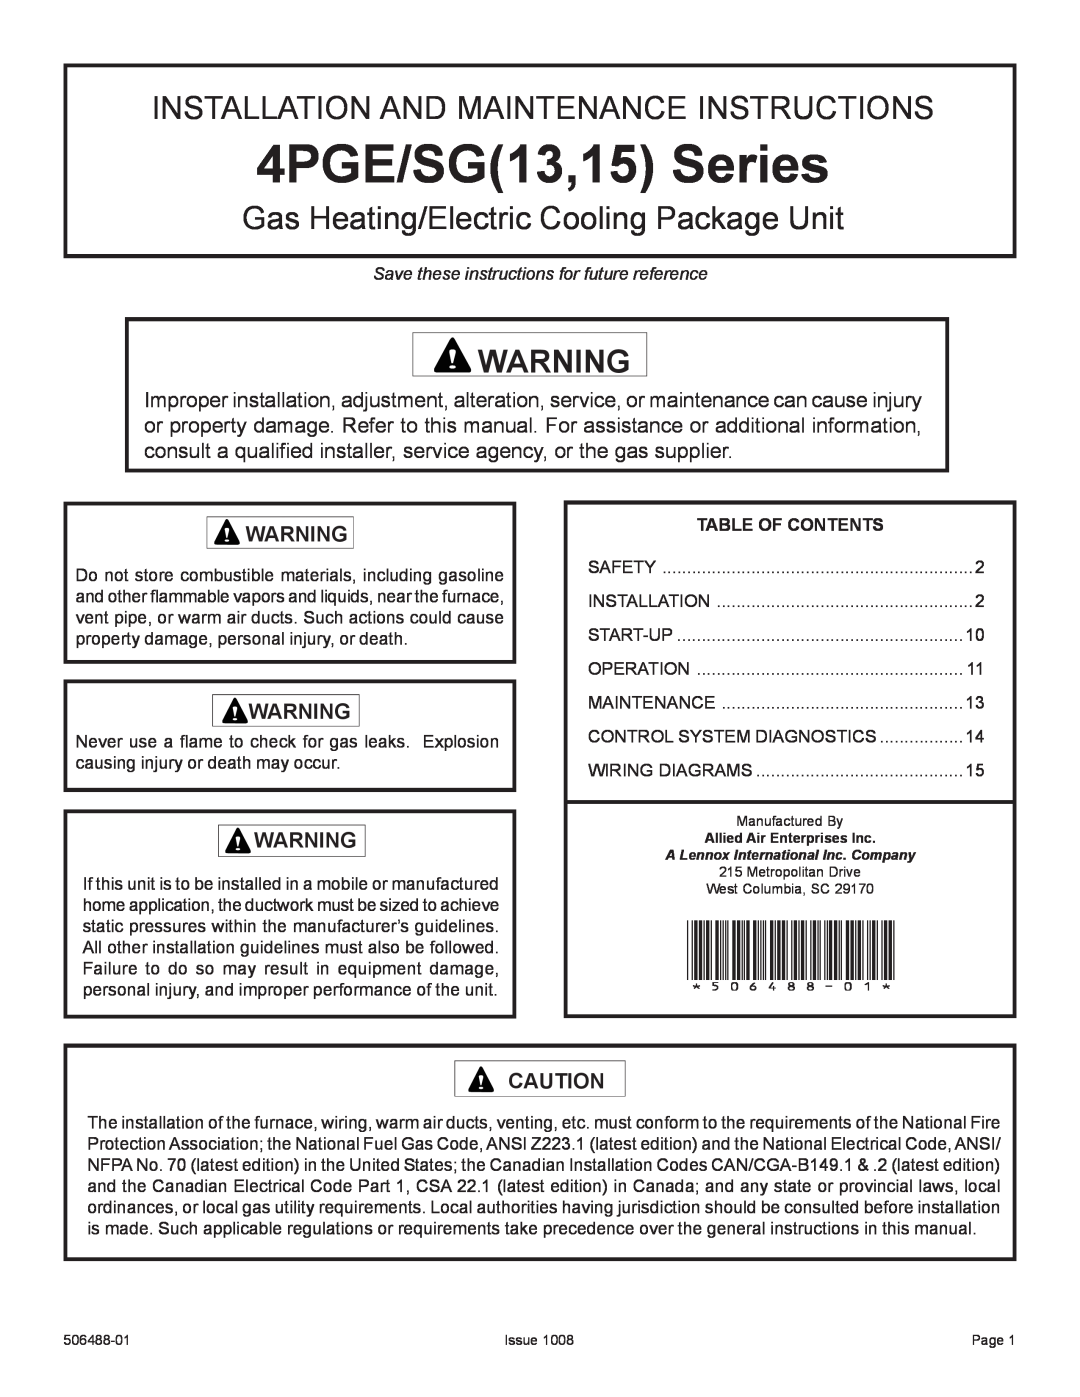 Allied Air Enterprises manual Table Of Contents, 4PGE/SG13,15 Series, Installation And Maintenance Instructions 